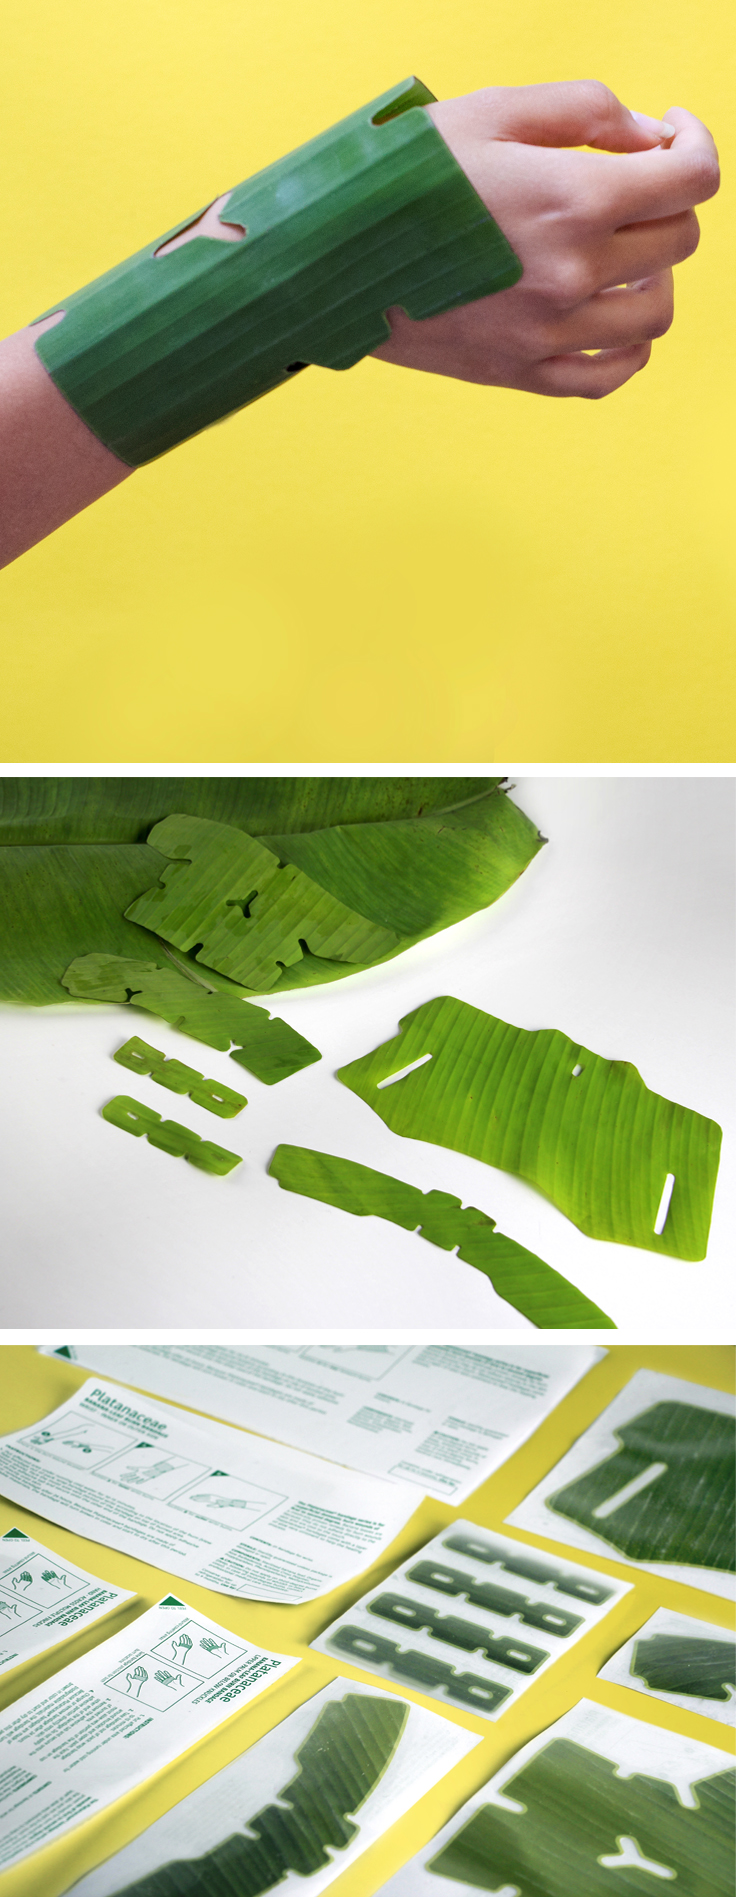 Banana leaf bandages that outperform synthetic materials yet are biodegradable and soothing, PLATANACEAE is a series of first aid bandages for burn wounds that happen at home. The hydrated texture of banana leaves is refreshing when in contact with the skin. These bandages wrap around different parts of the hands and arms. PLATANACEAE | Designer: Paula Cermeno | Lexus Design Award 2017 | Milan Design Week | La Triennale di Milano | Awesome Products #product_design